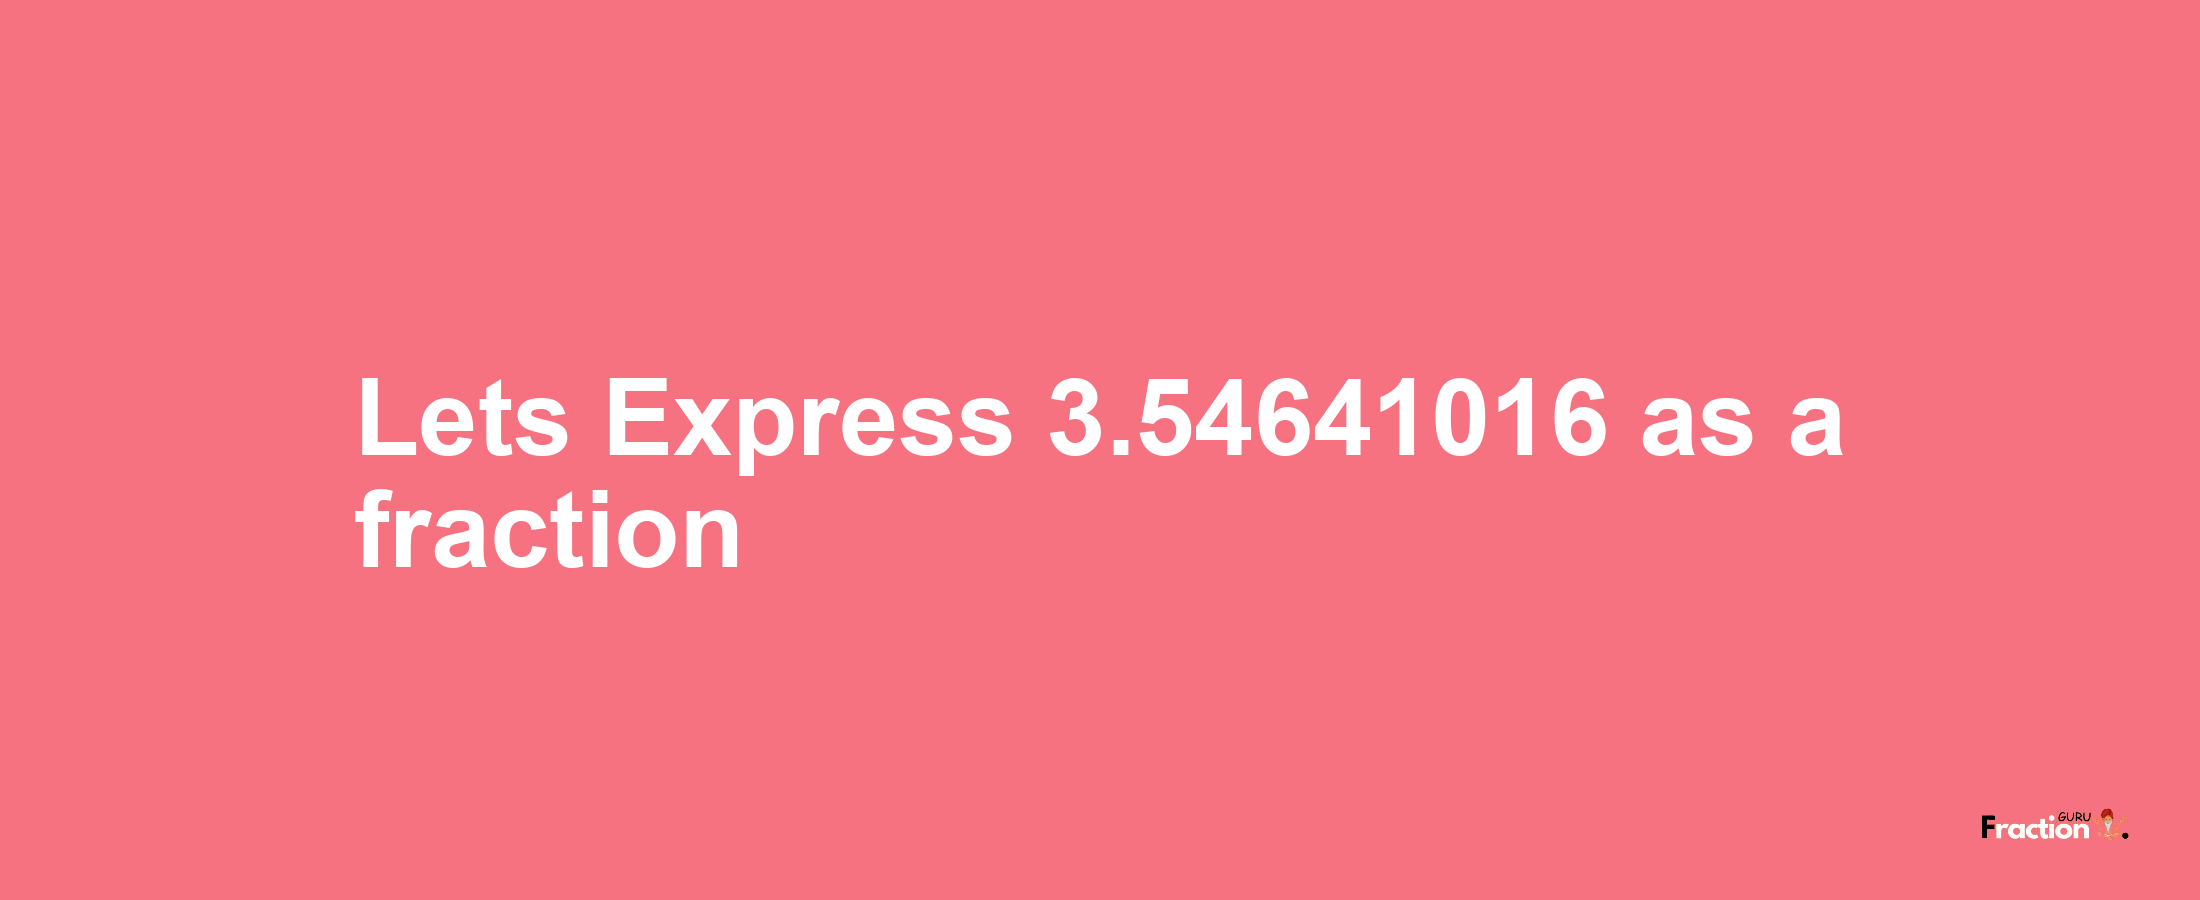 Lets Express 3.54641016 as afraction